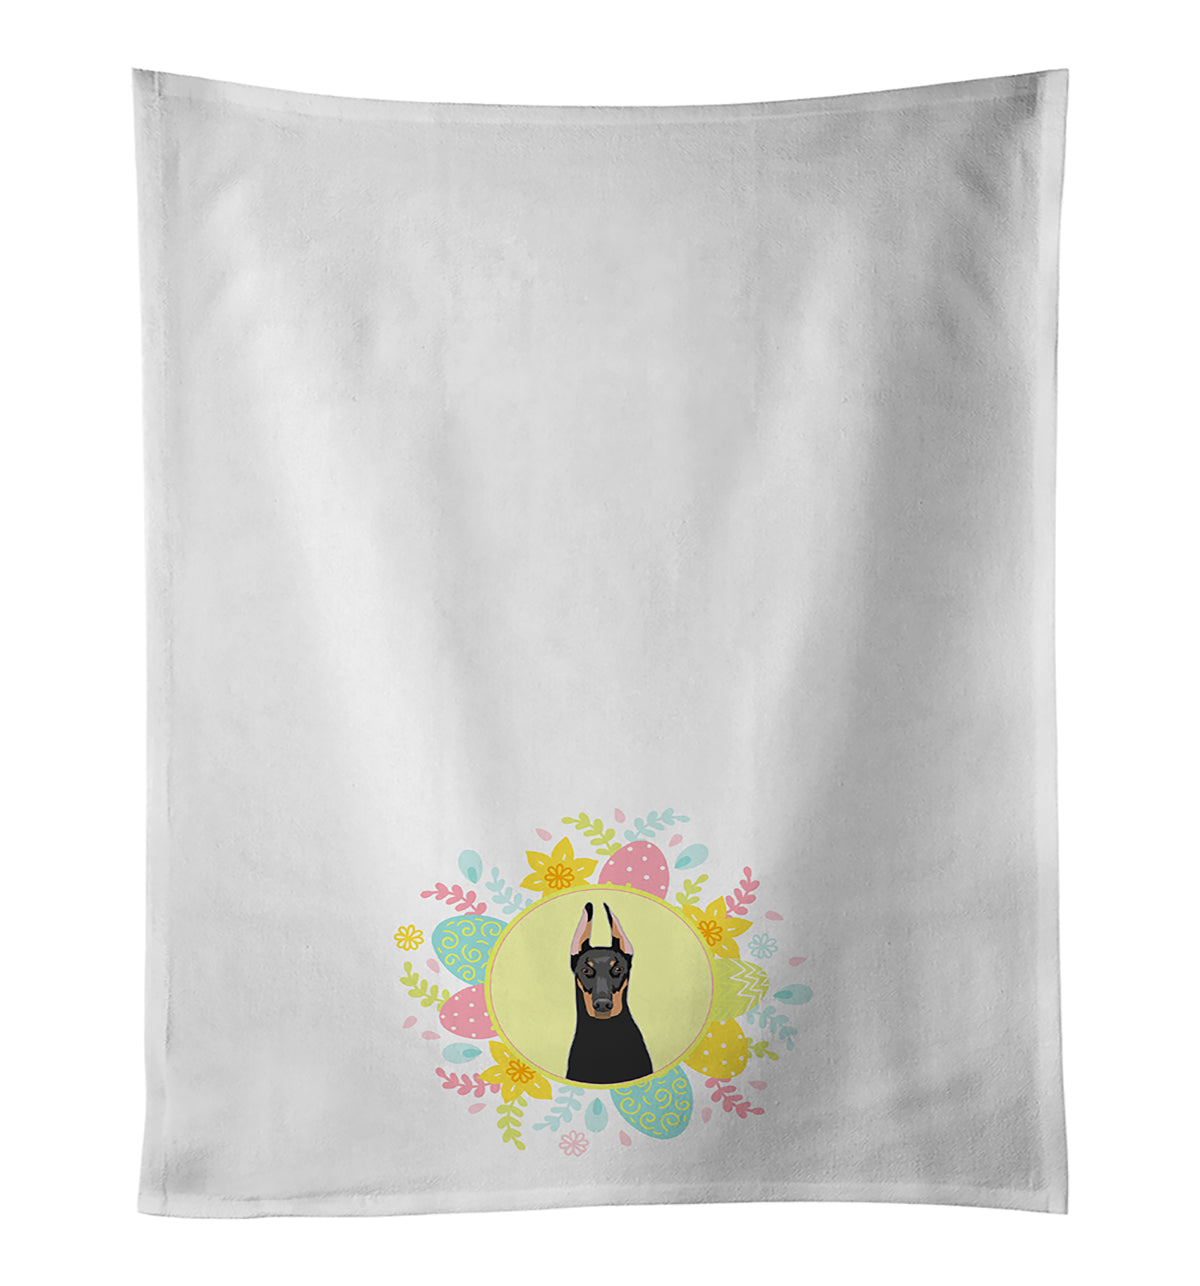 Buy this Doberman Pinscher Black and Rust Cropped Ears Easter White Kitchen Towel Set of 2